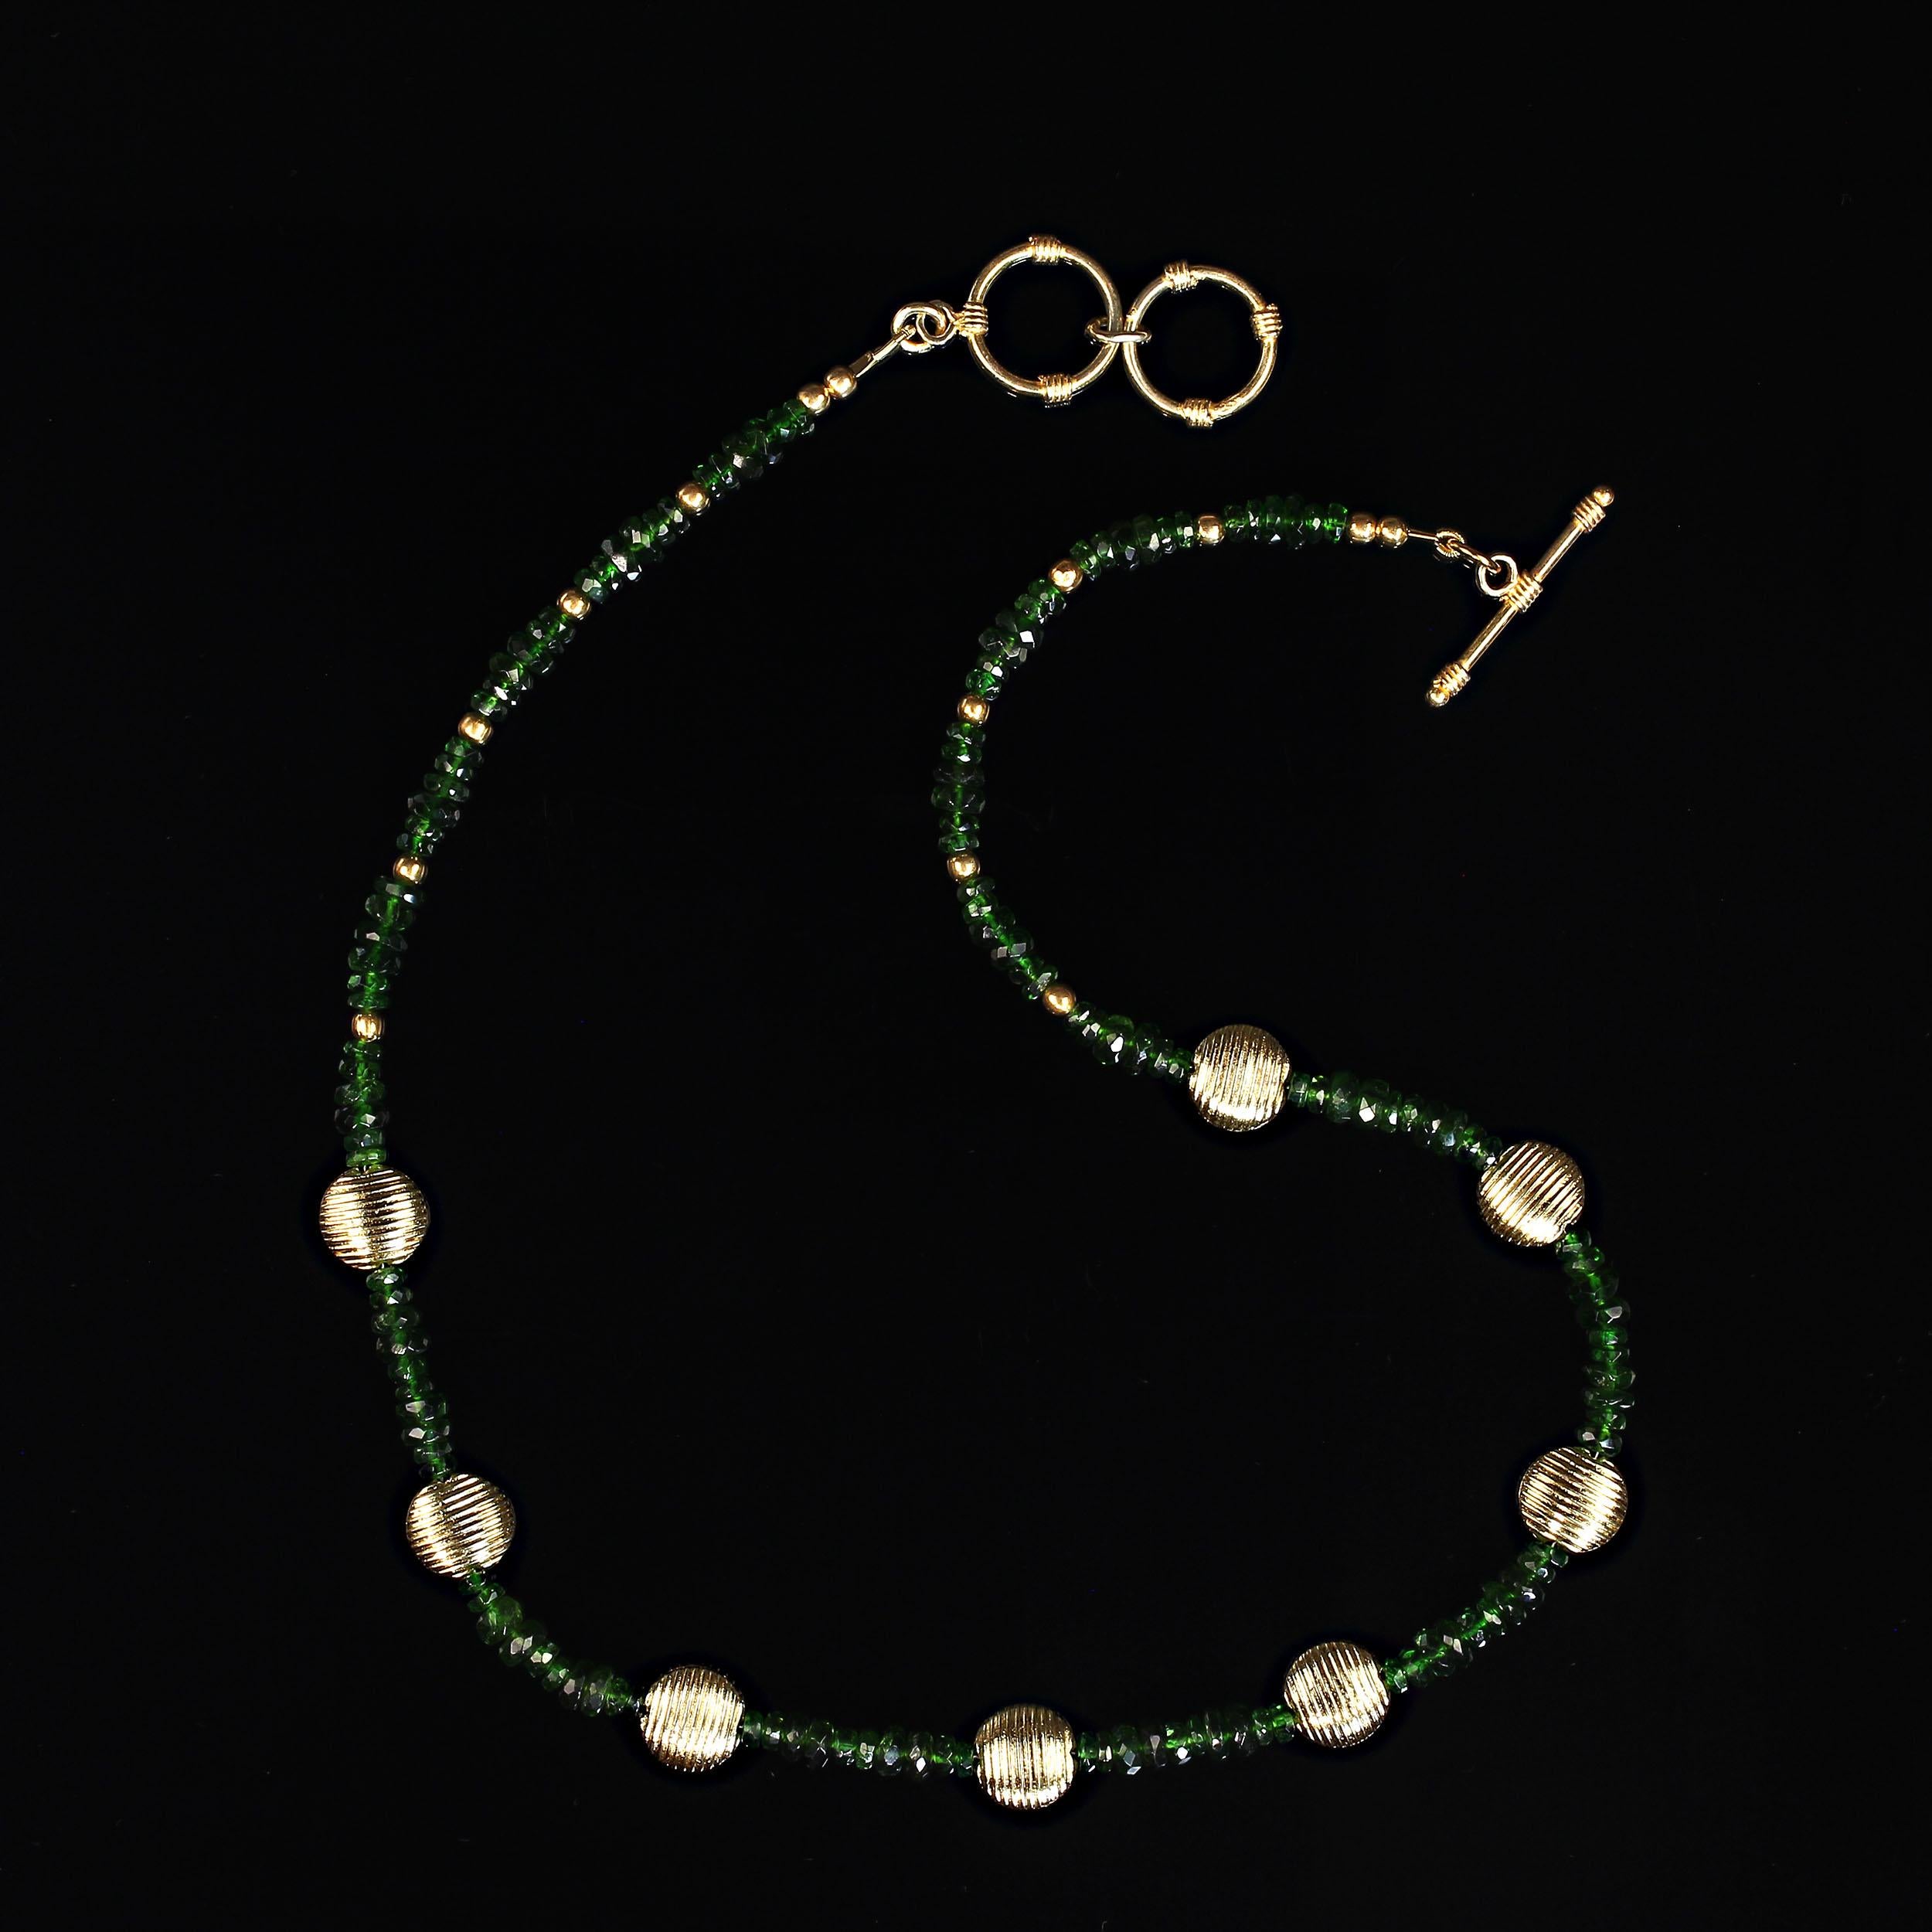 Bead AJD Delicate Green Chrome Diopside and Goldy Accents Necklace  Great Gift! For Sale